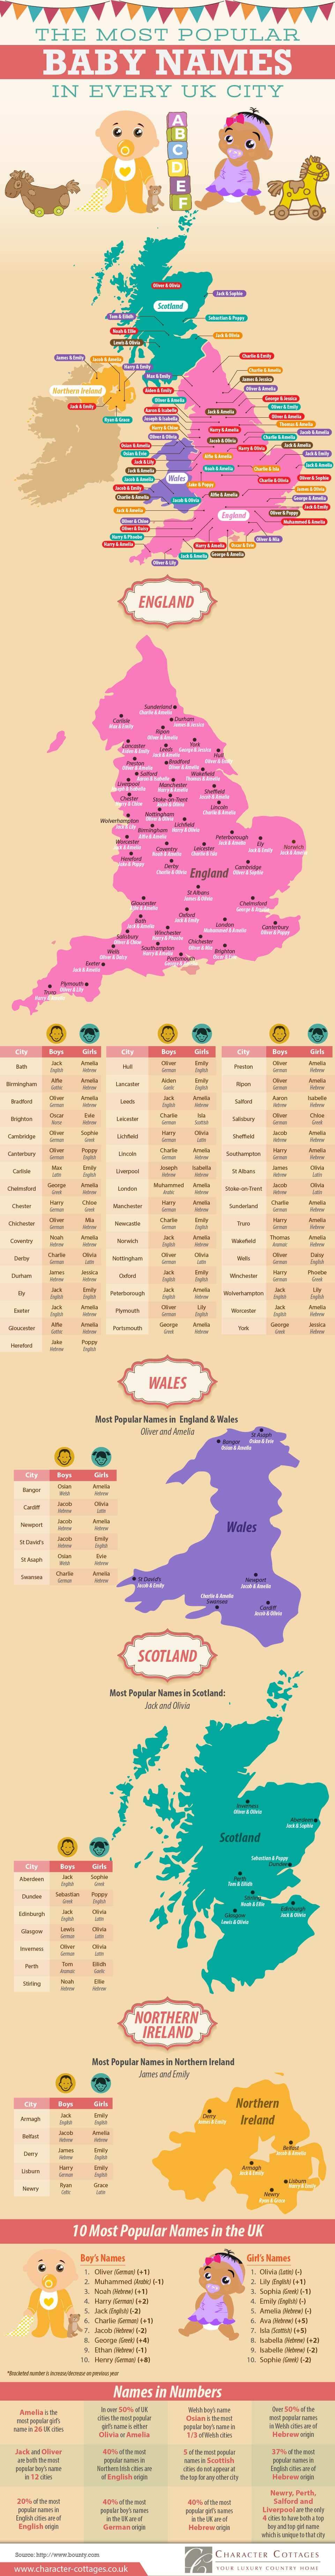 Most Popular Baby Names in Every UK City